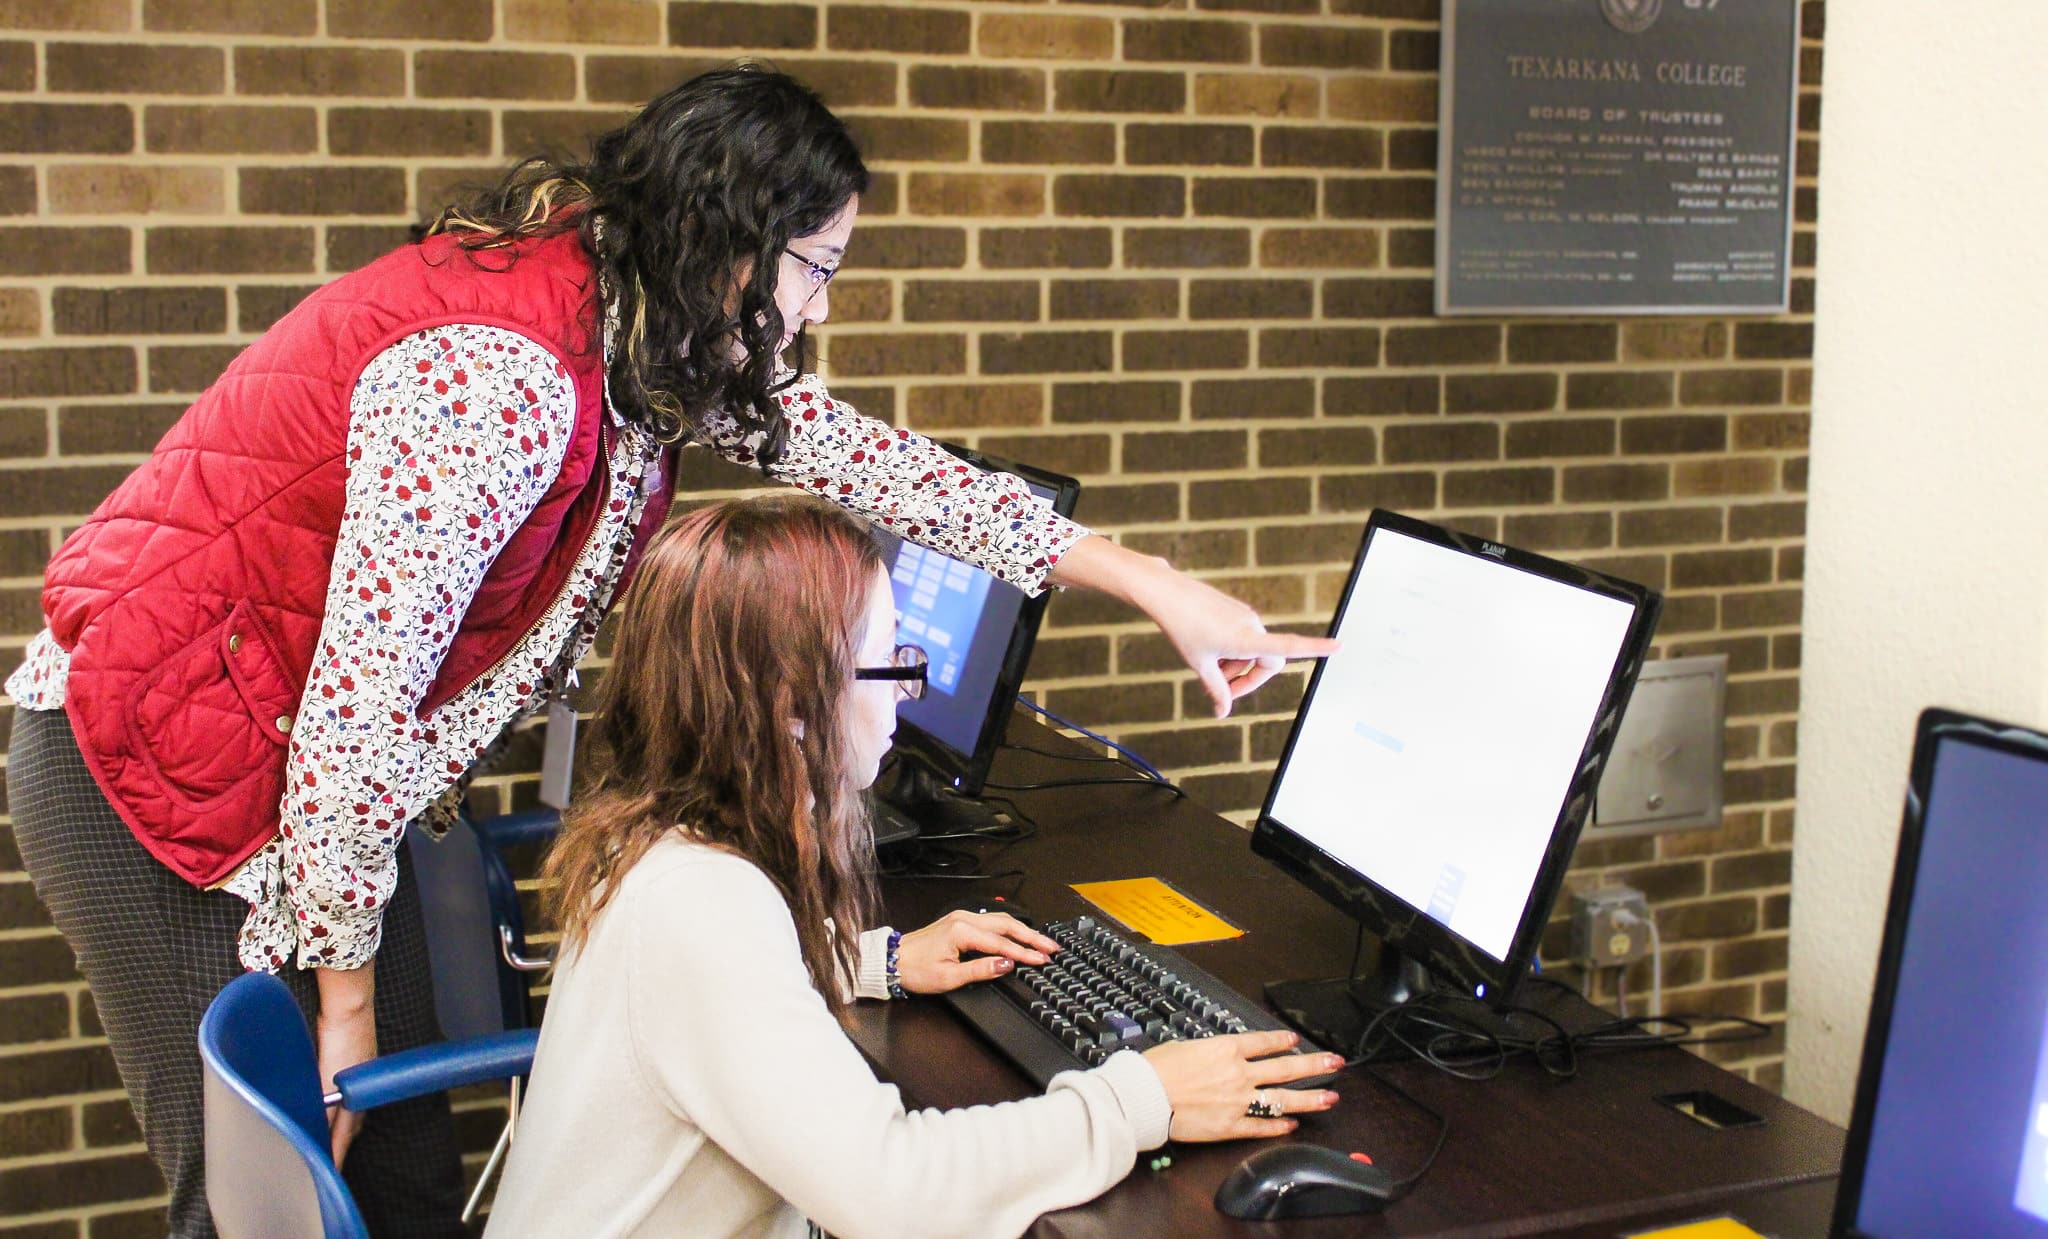 Student completing financial aid application online with assistance from Texarkana College Financial Aid specialist